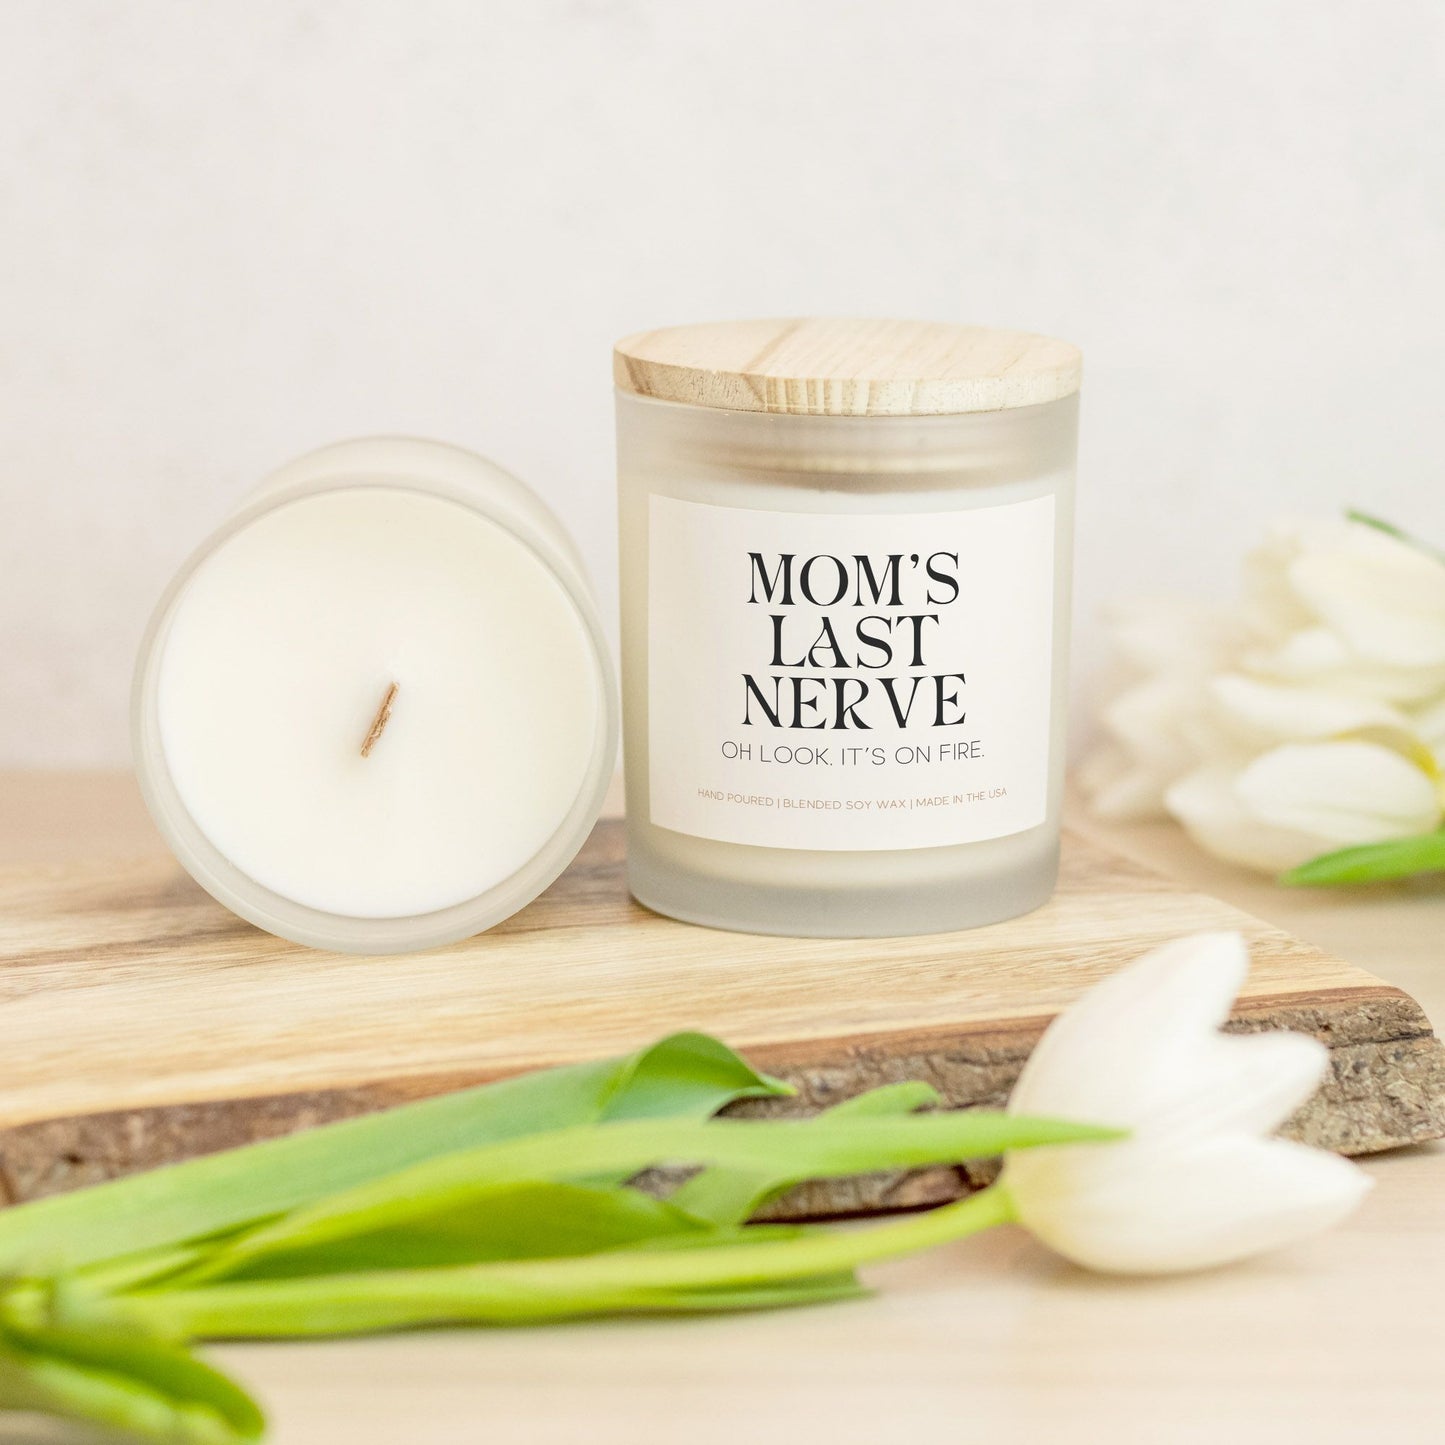 MOM'S LAST NERVE FROSTED GLASS CANDLE